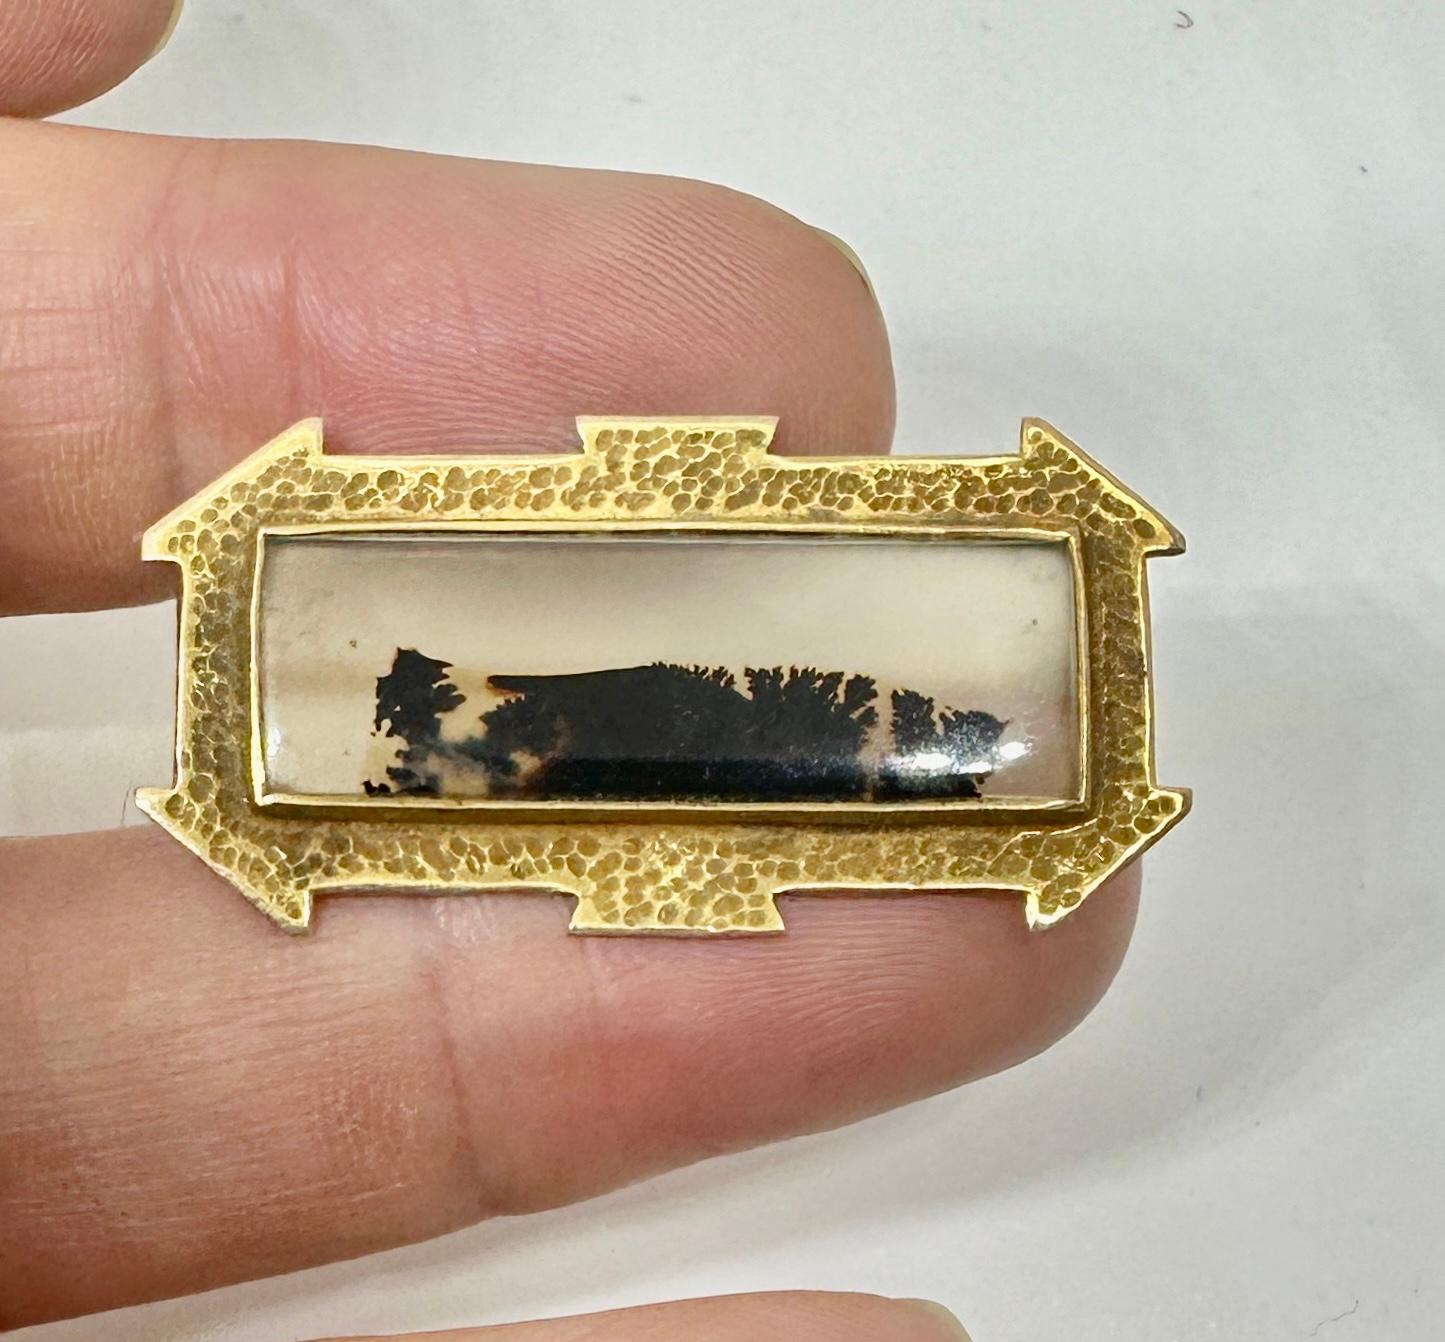 This is an absolutely stunning antique Victorian Picture Agate Brooch Pin set in a gorgeous Etruscan Revival setting in 10 Karat Gold.  The Picture Agate depicts a forest scene and is a fabulous example of nature's wonder.  The natural picture agate